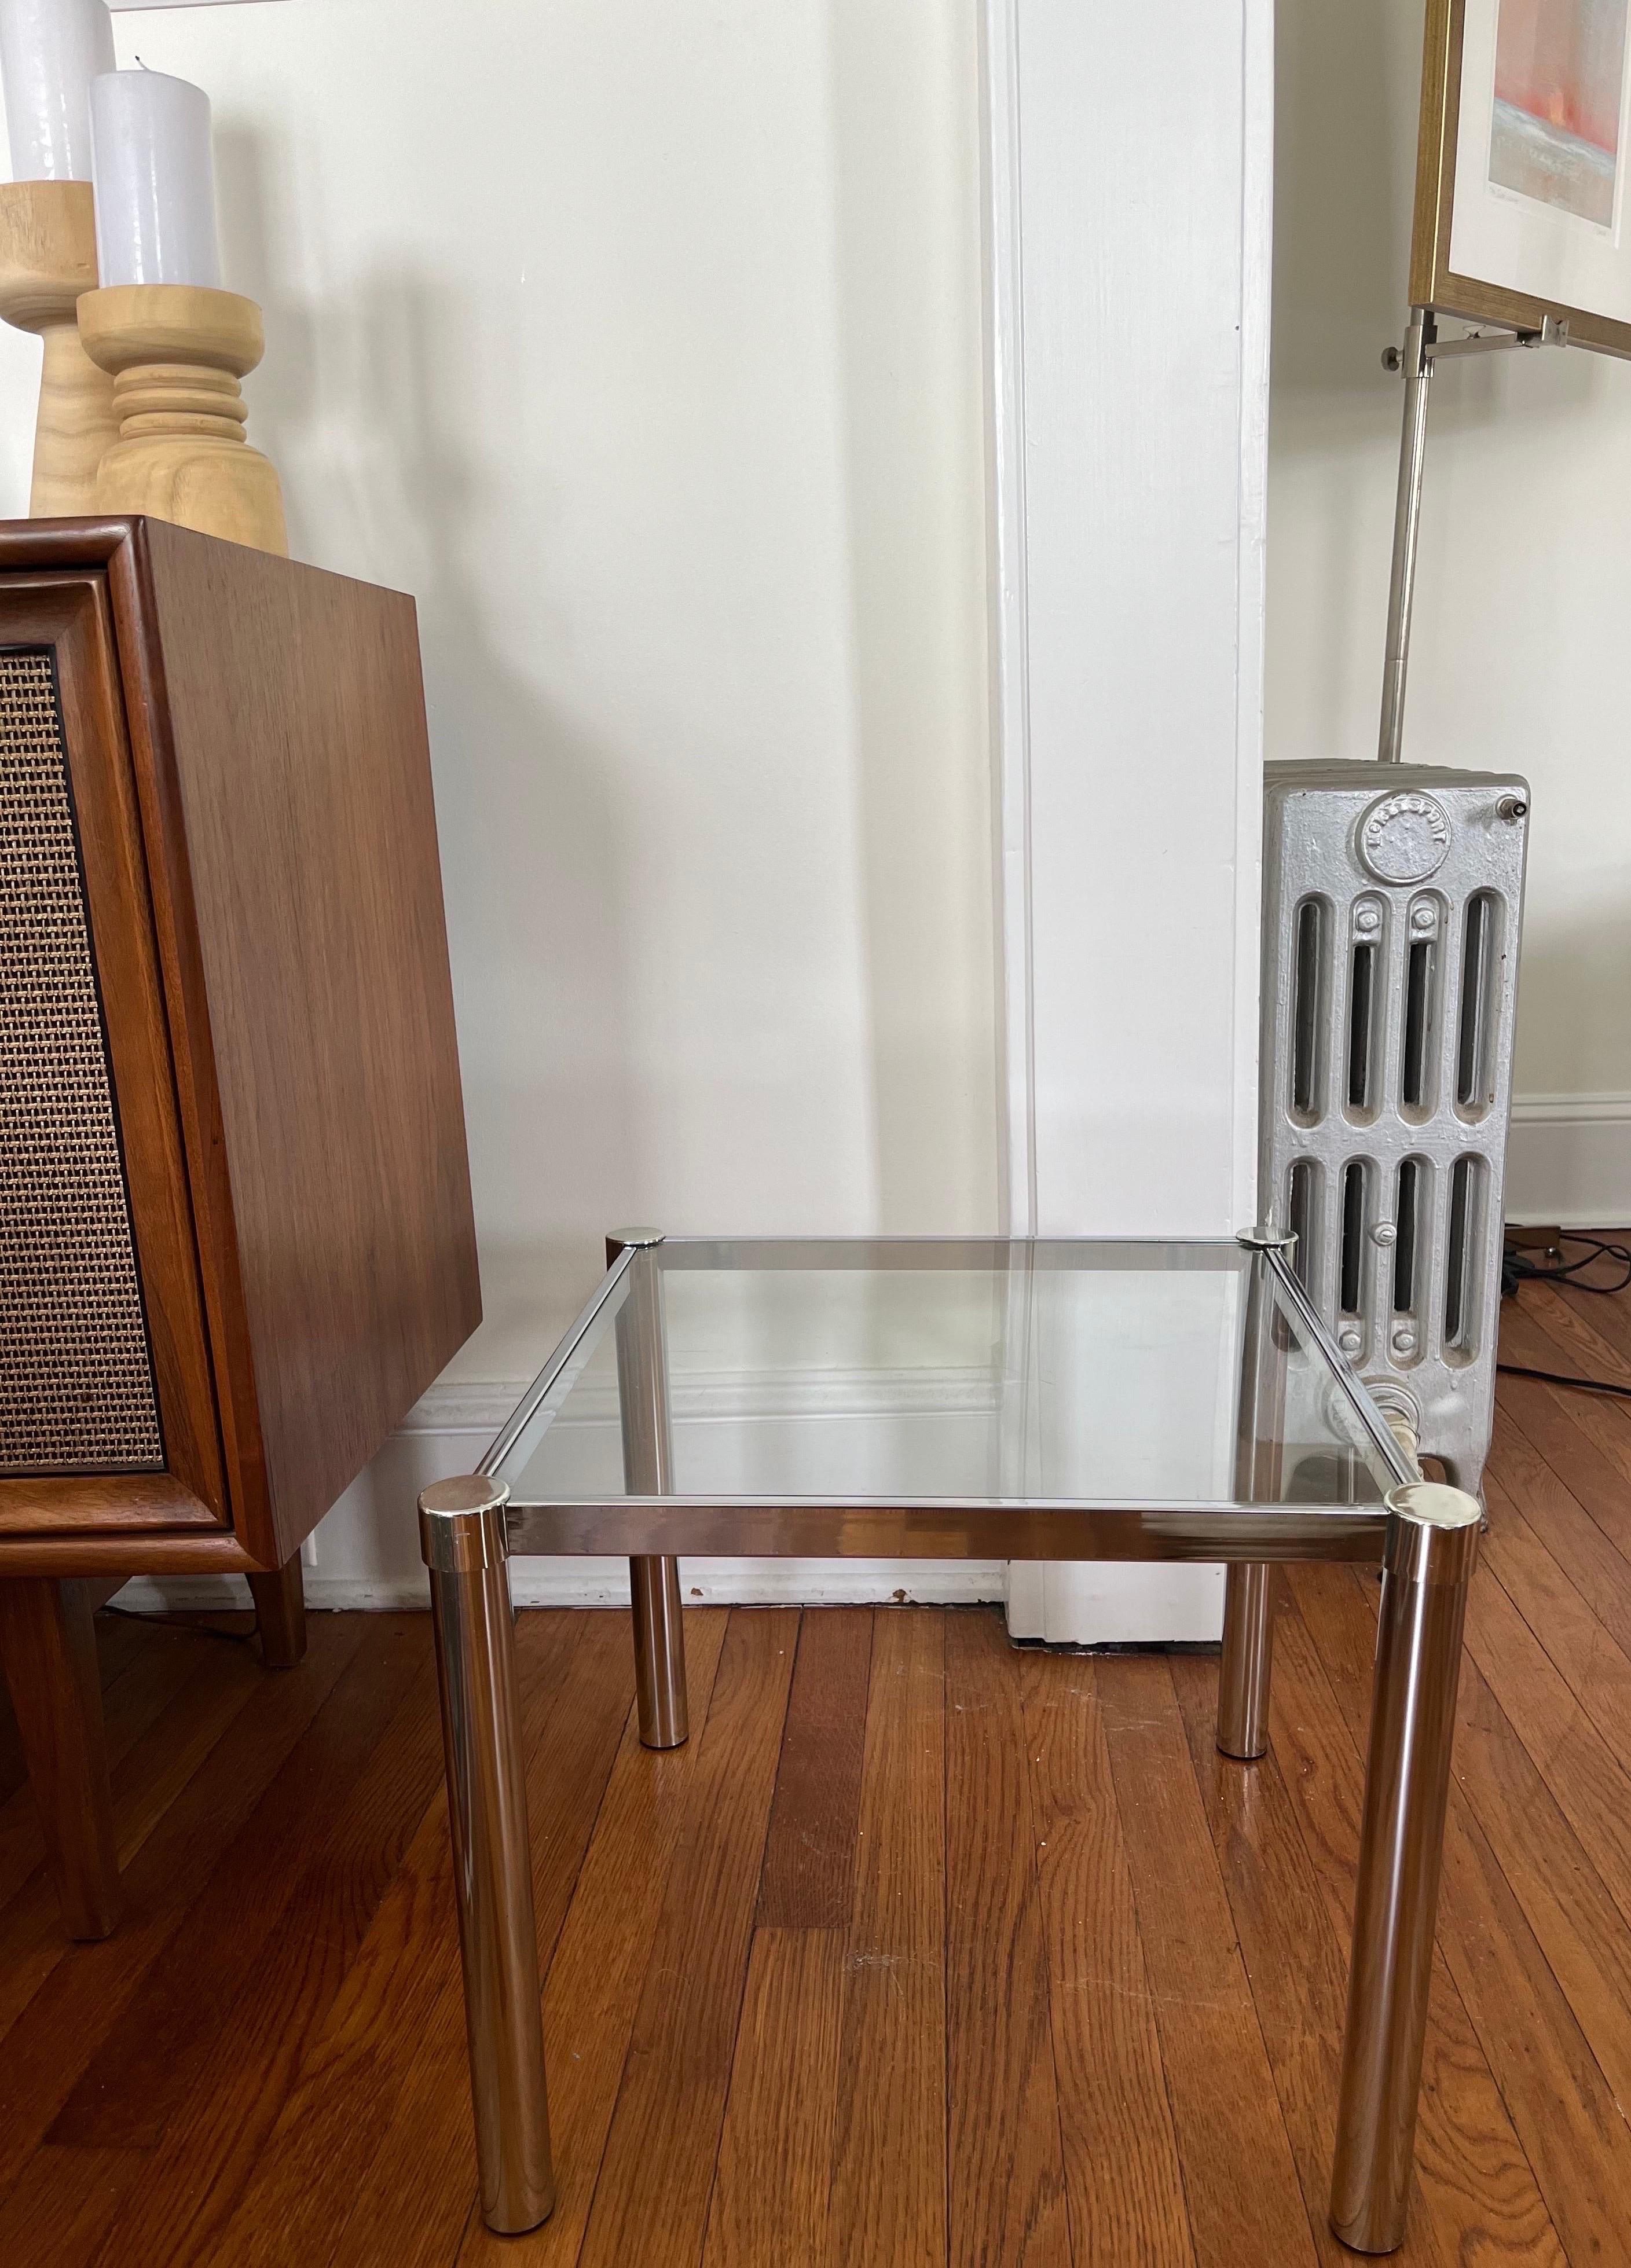 Classic 70's Chrome and glass nesting tables. Tubular frames with caps to hold glass in place. Great mod vibes. Can be disassembled for shipping.
Curbside to NYC/Philly $350